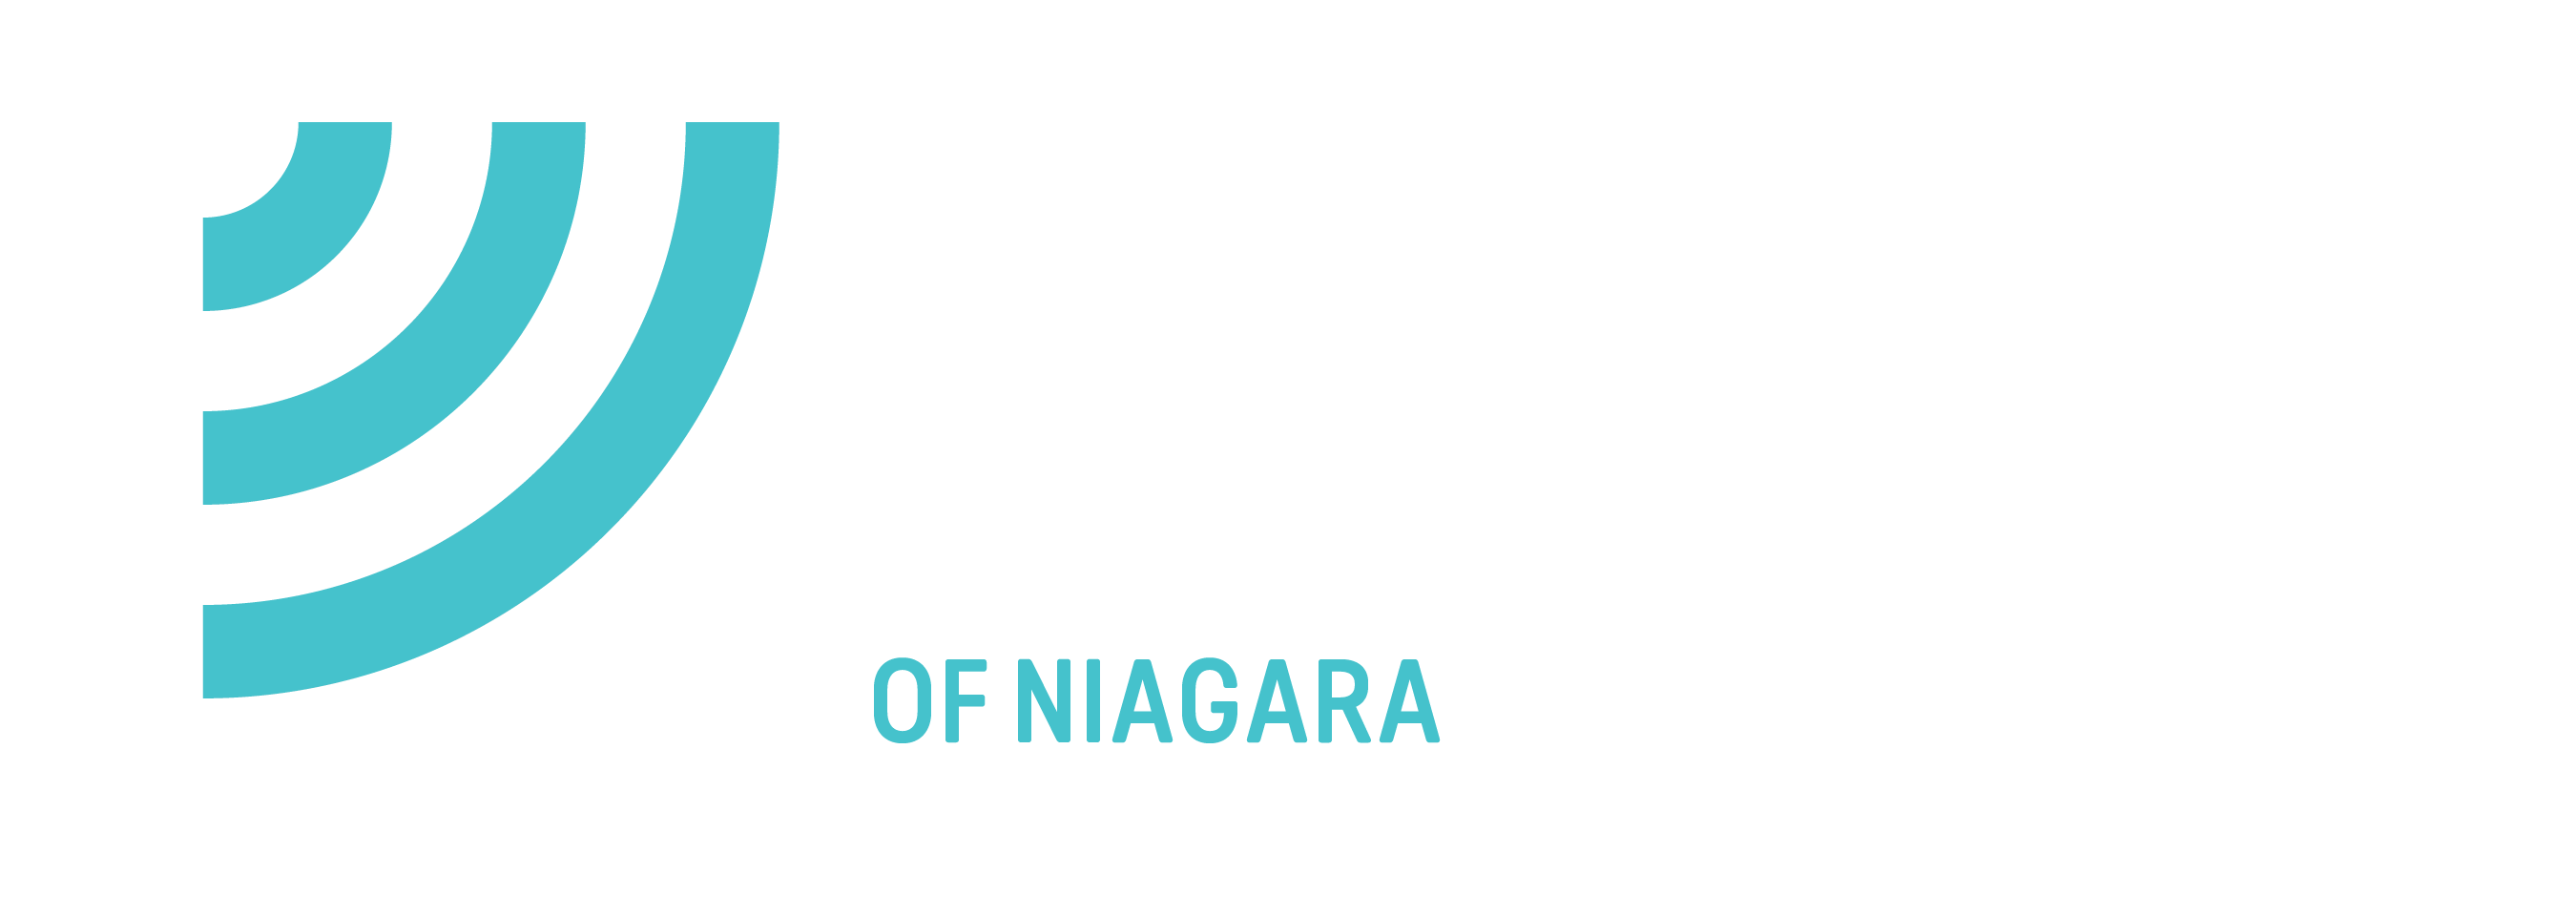 SUBSCRIBE TO OUR NEWSLETTER - Big Brothers Big Sisters of Niagara